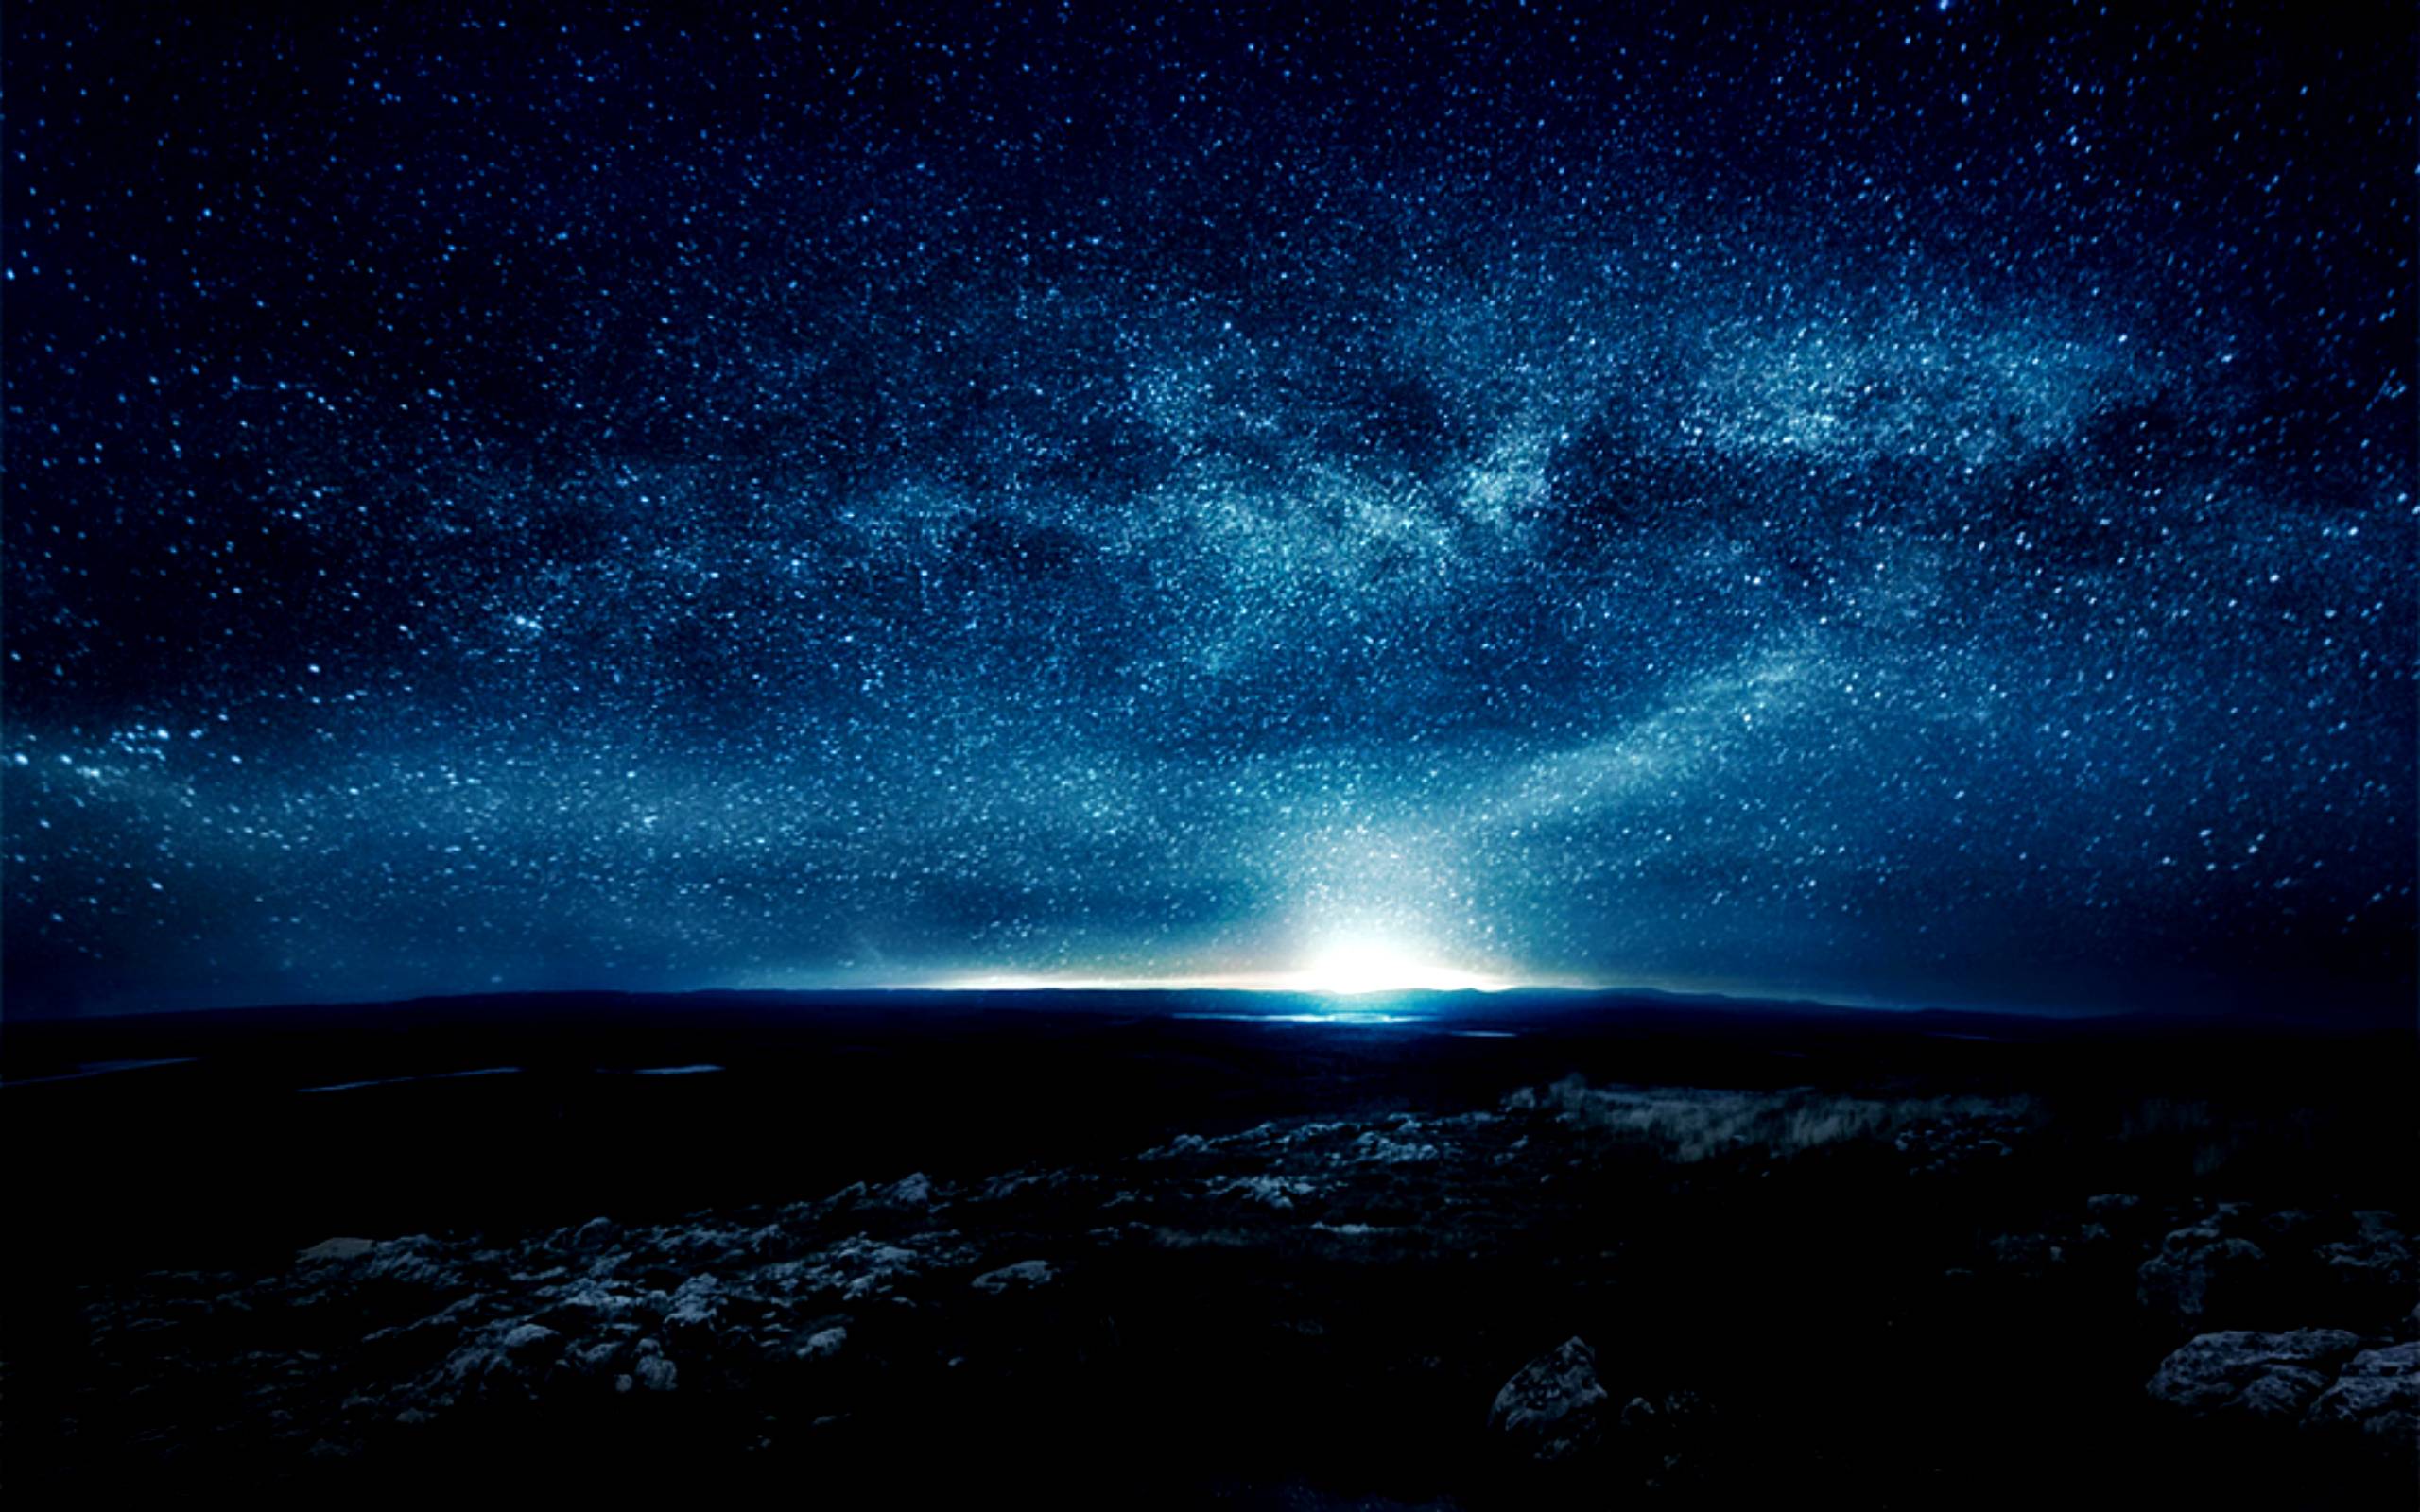 Wallpaper For > Beautiful Night Sky Background